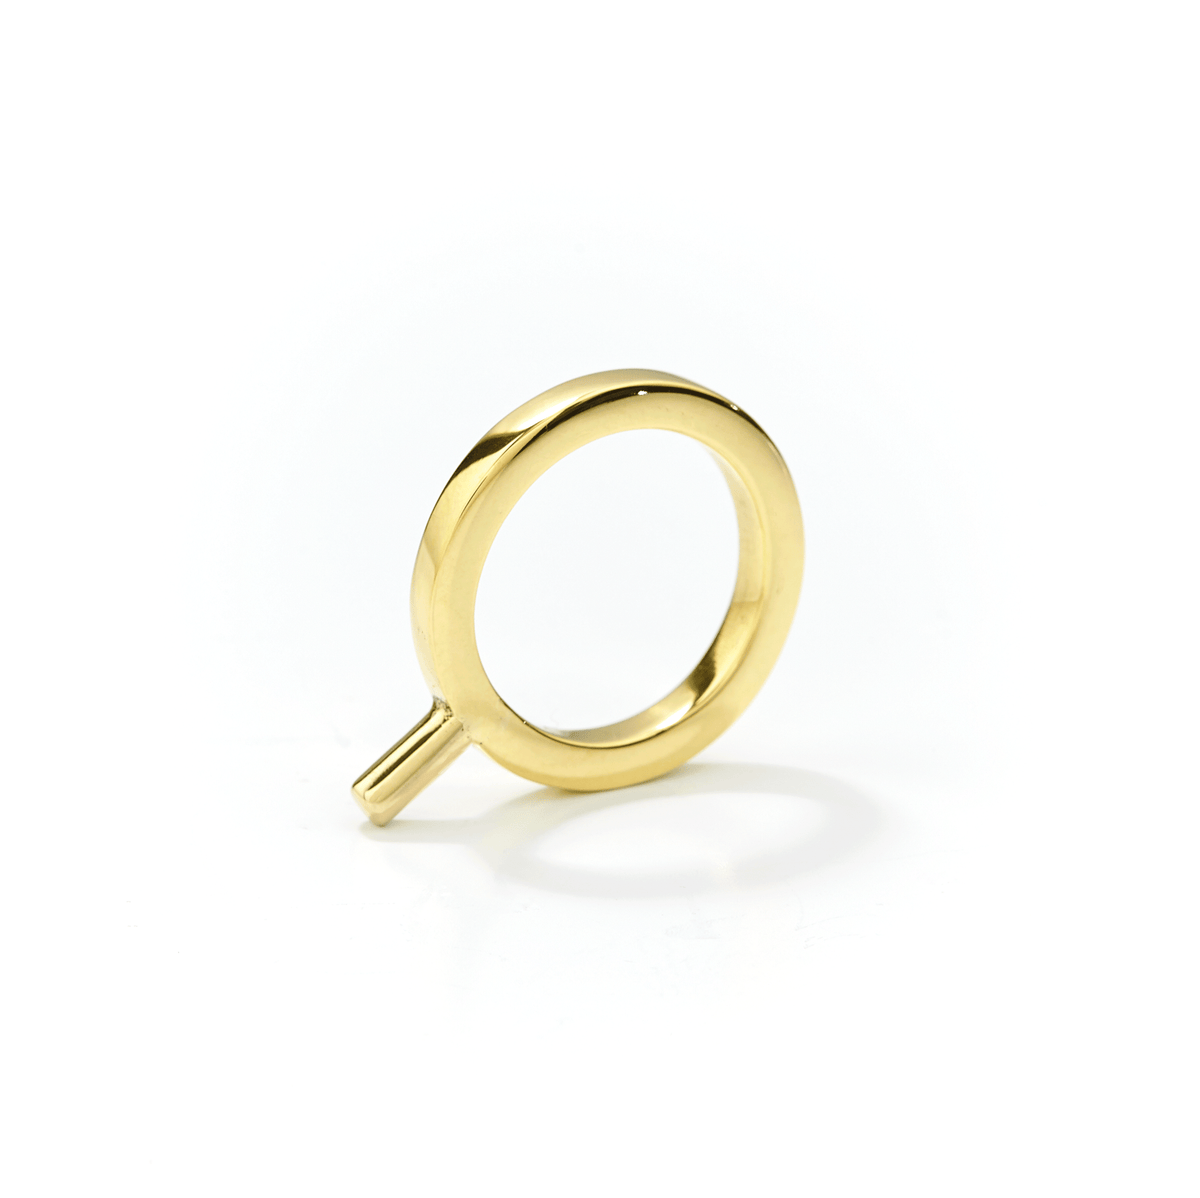 D-Mond Ring GOLD - MVDT COLLECTION